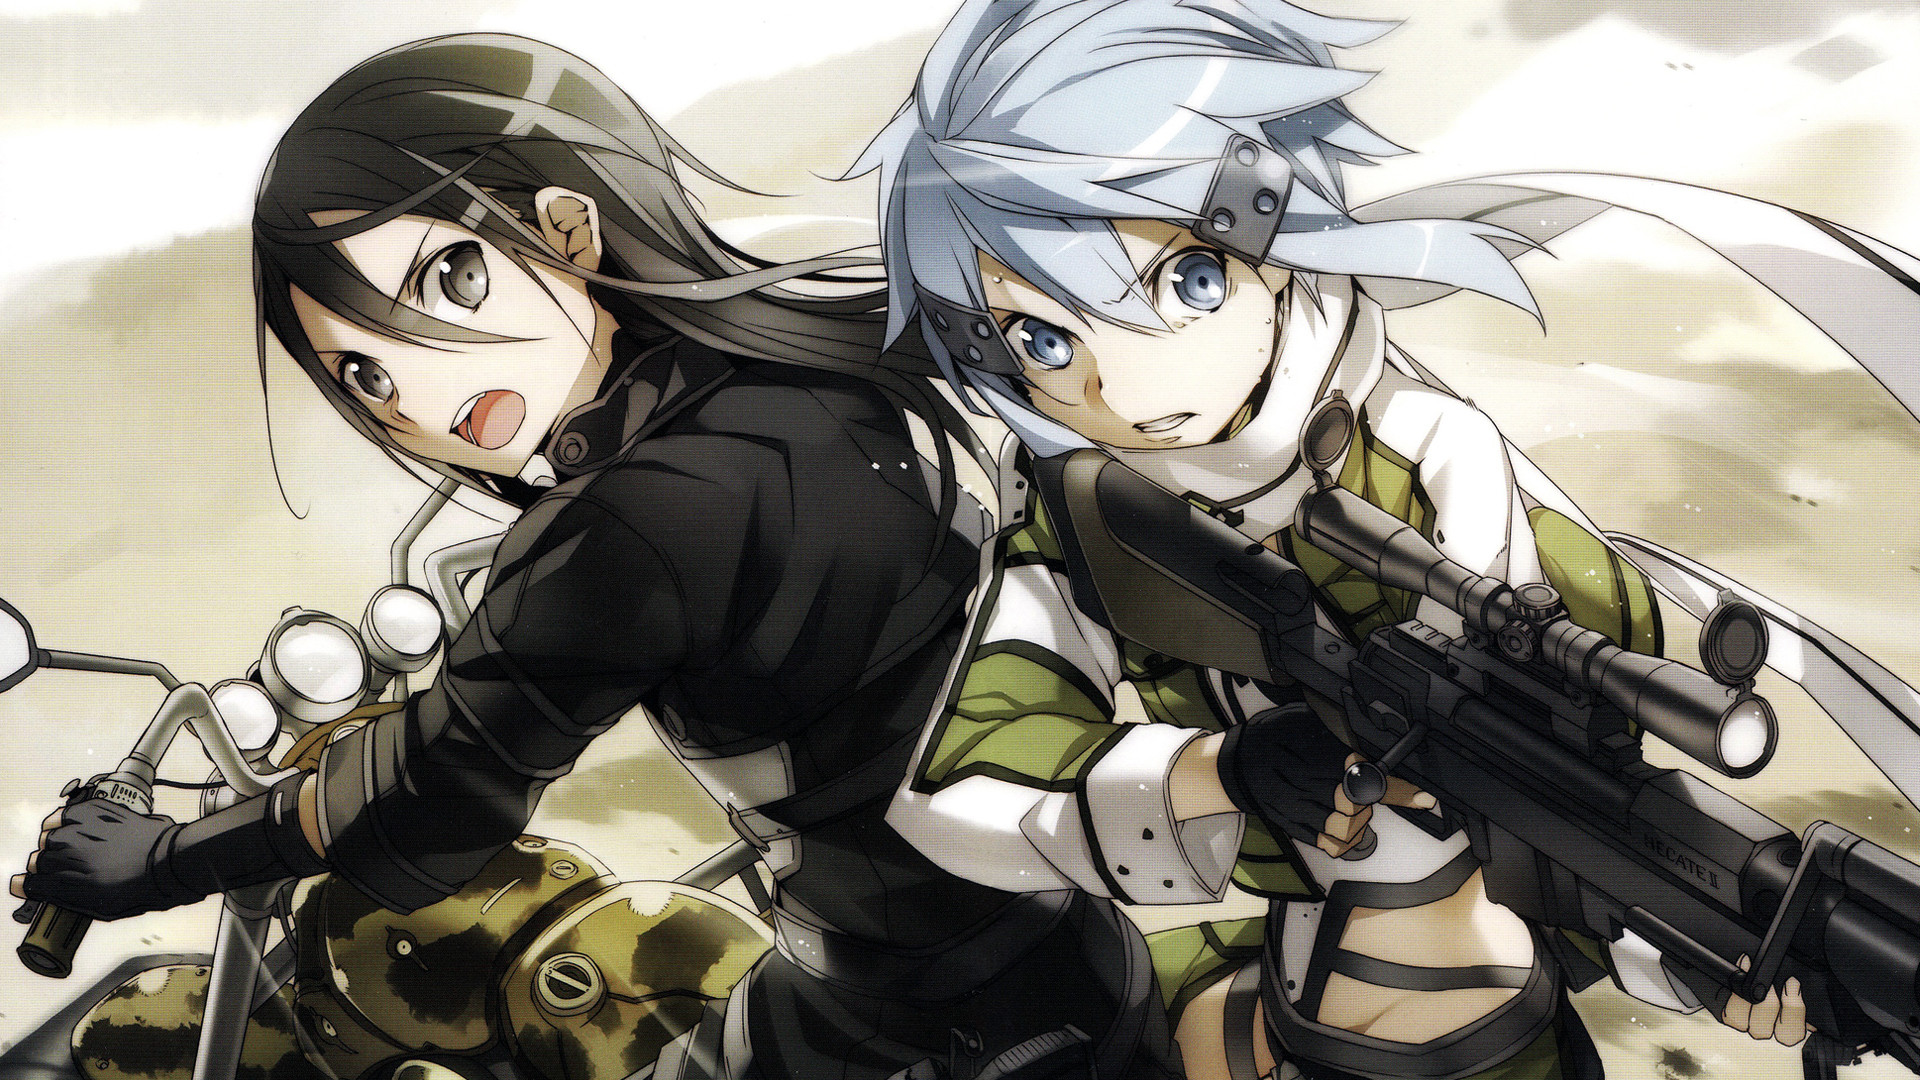 1920x1080 944 Sword Art Online II HD Wallpapers | Backgrounds - Wallpaper Abyss -  Page 7